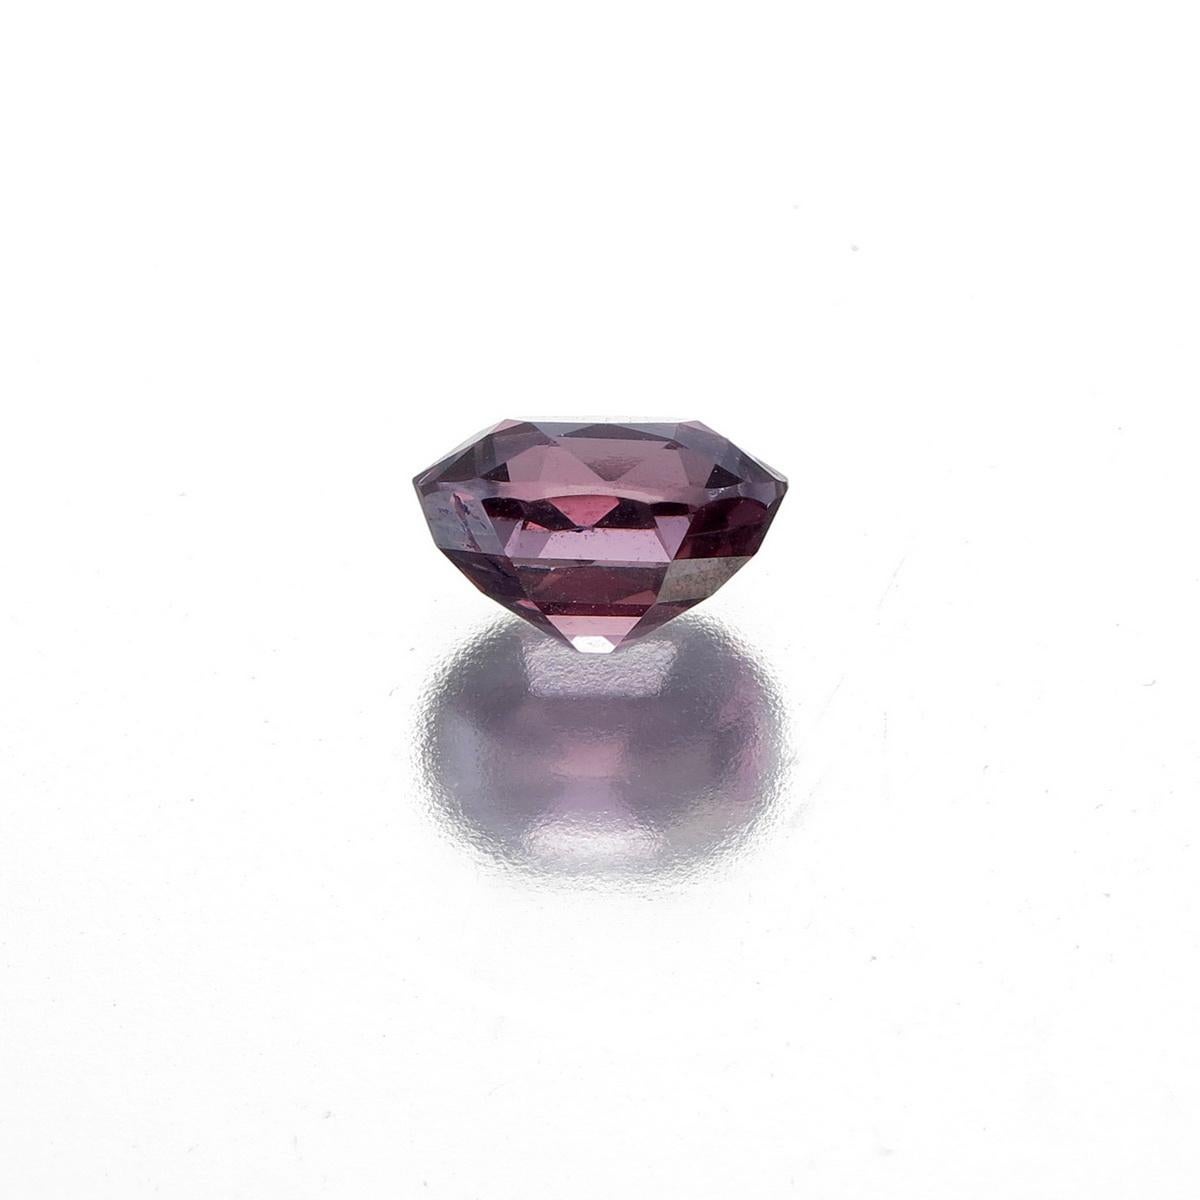 Oval Cut 1.63 Carat Natural Vivid Pink Spinel from Burma No Heat For Sale